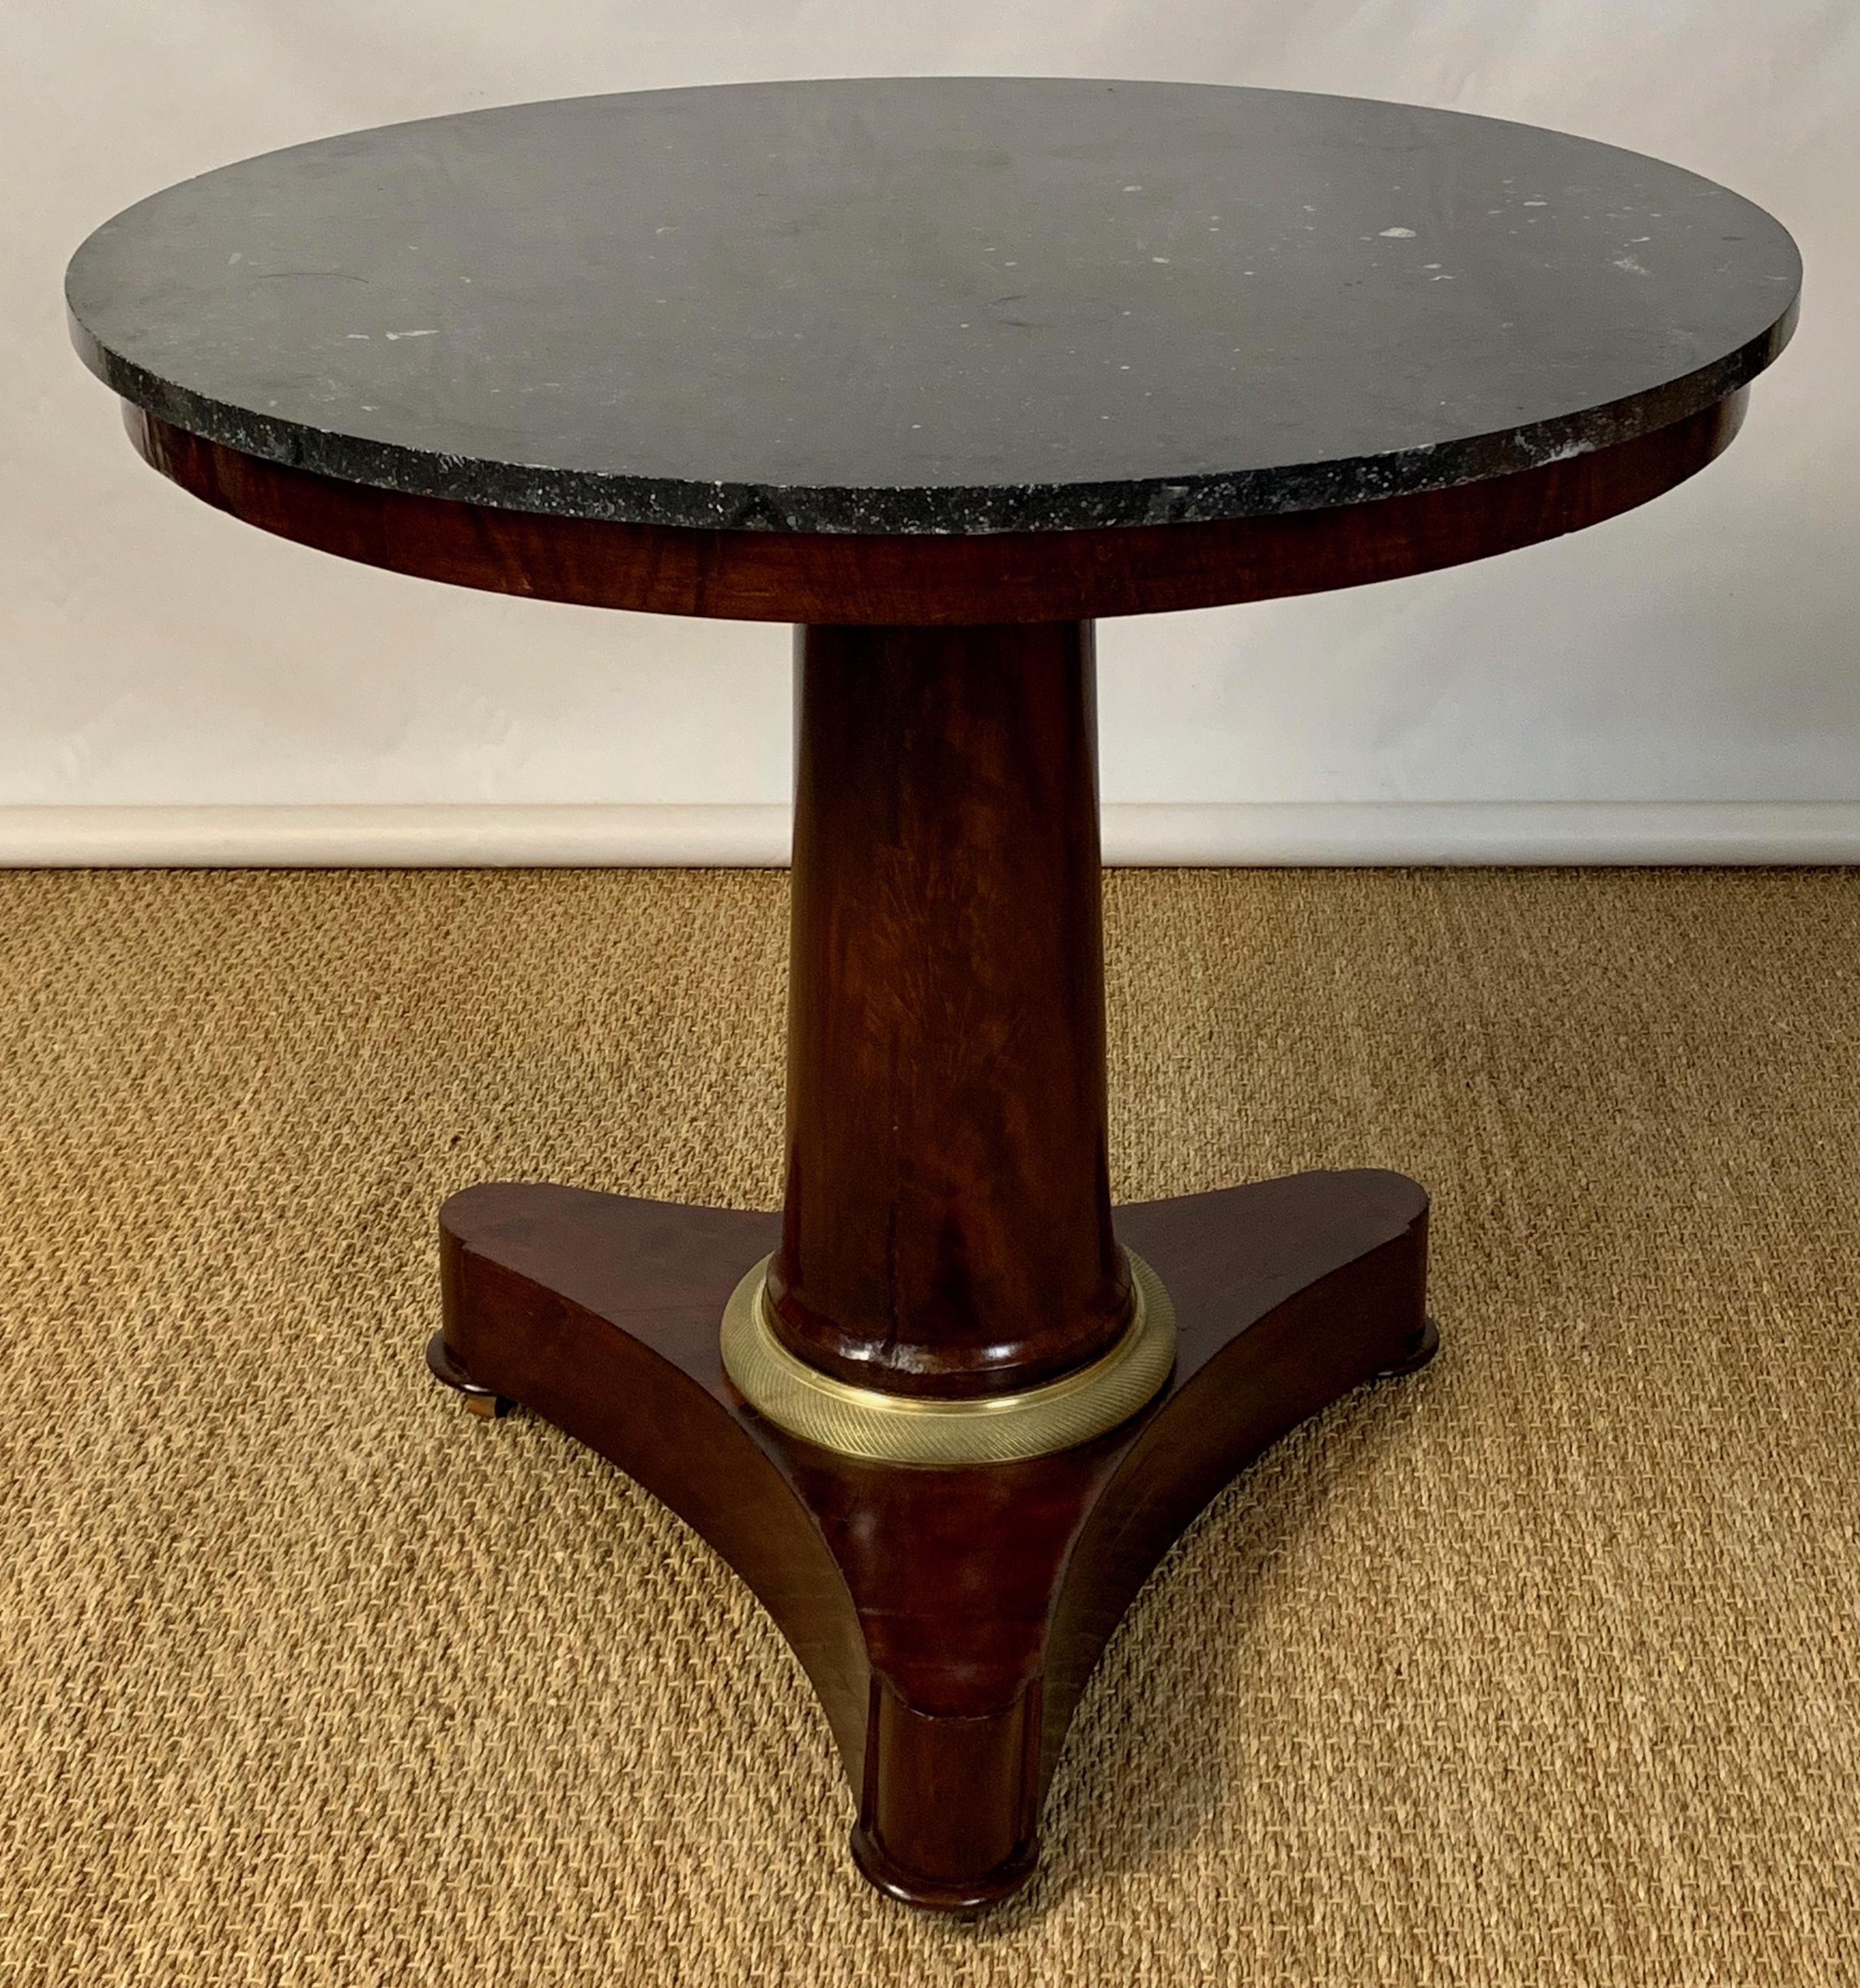 A classic and very elegant mid-19th century French Empire period mahogany and marble topped center table with gilt ormolu mounts. The fossilized black marble appears to be original to the piece.